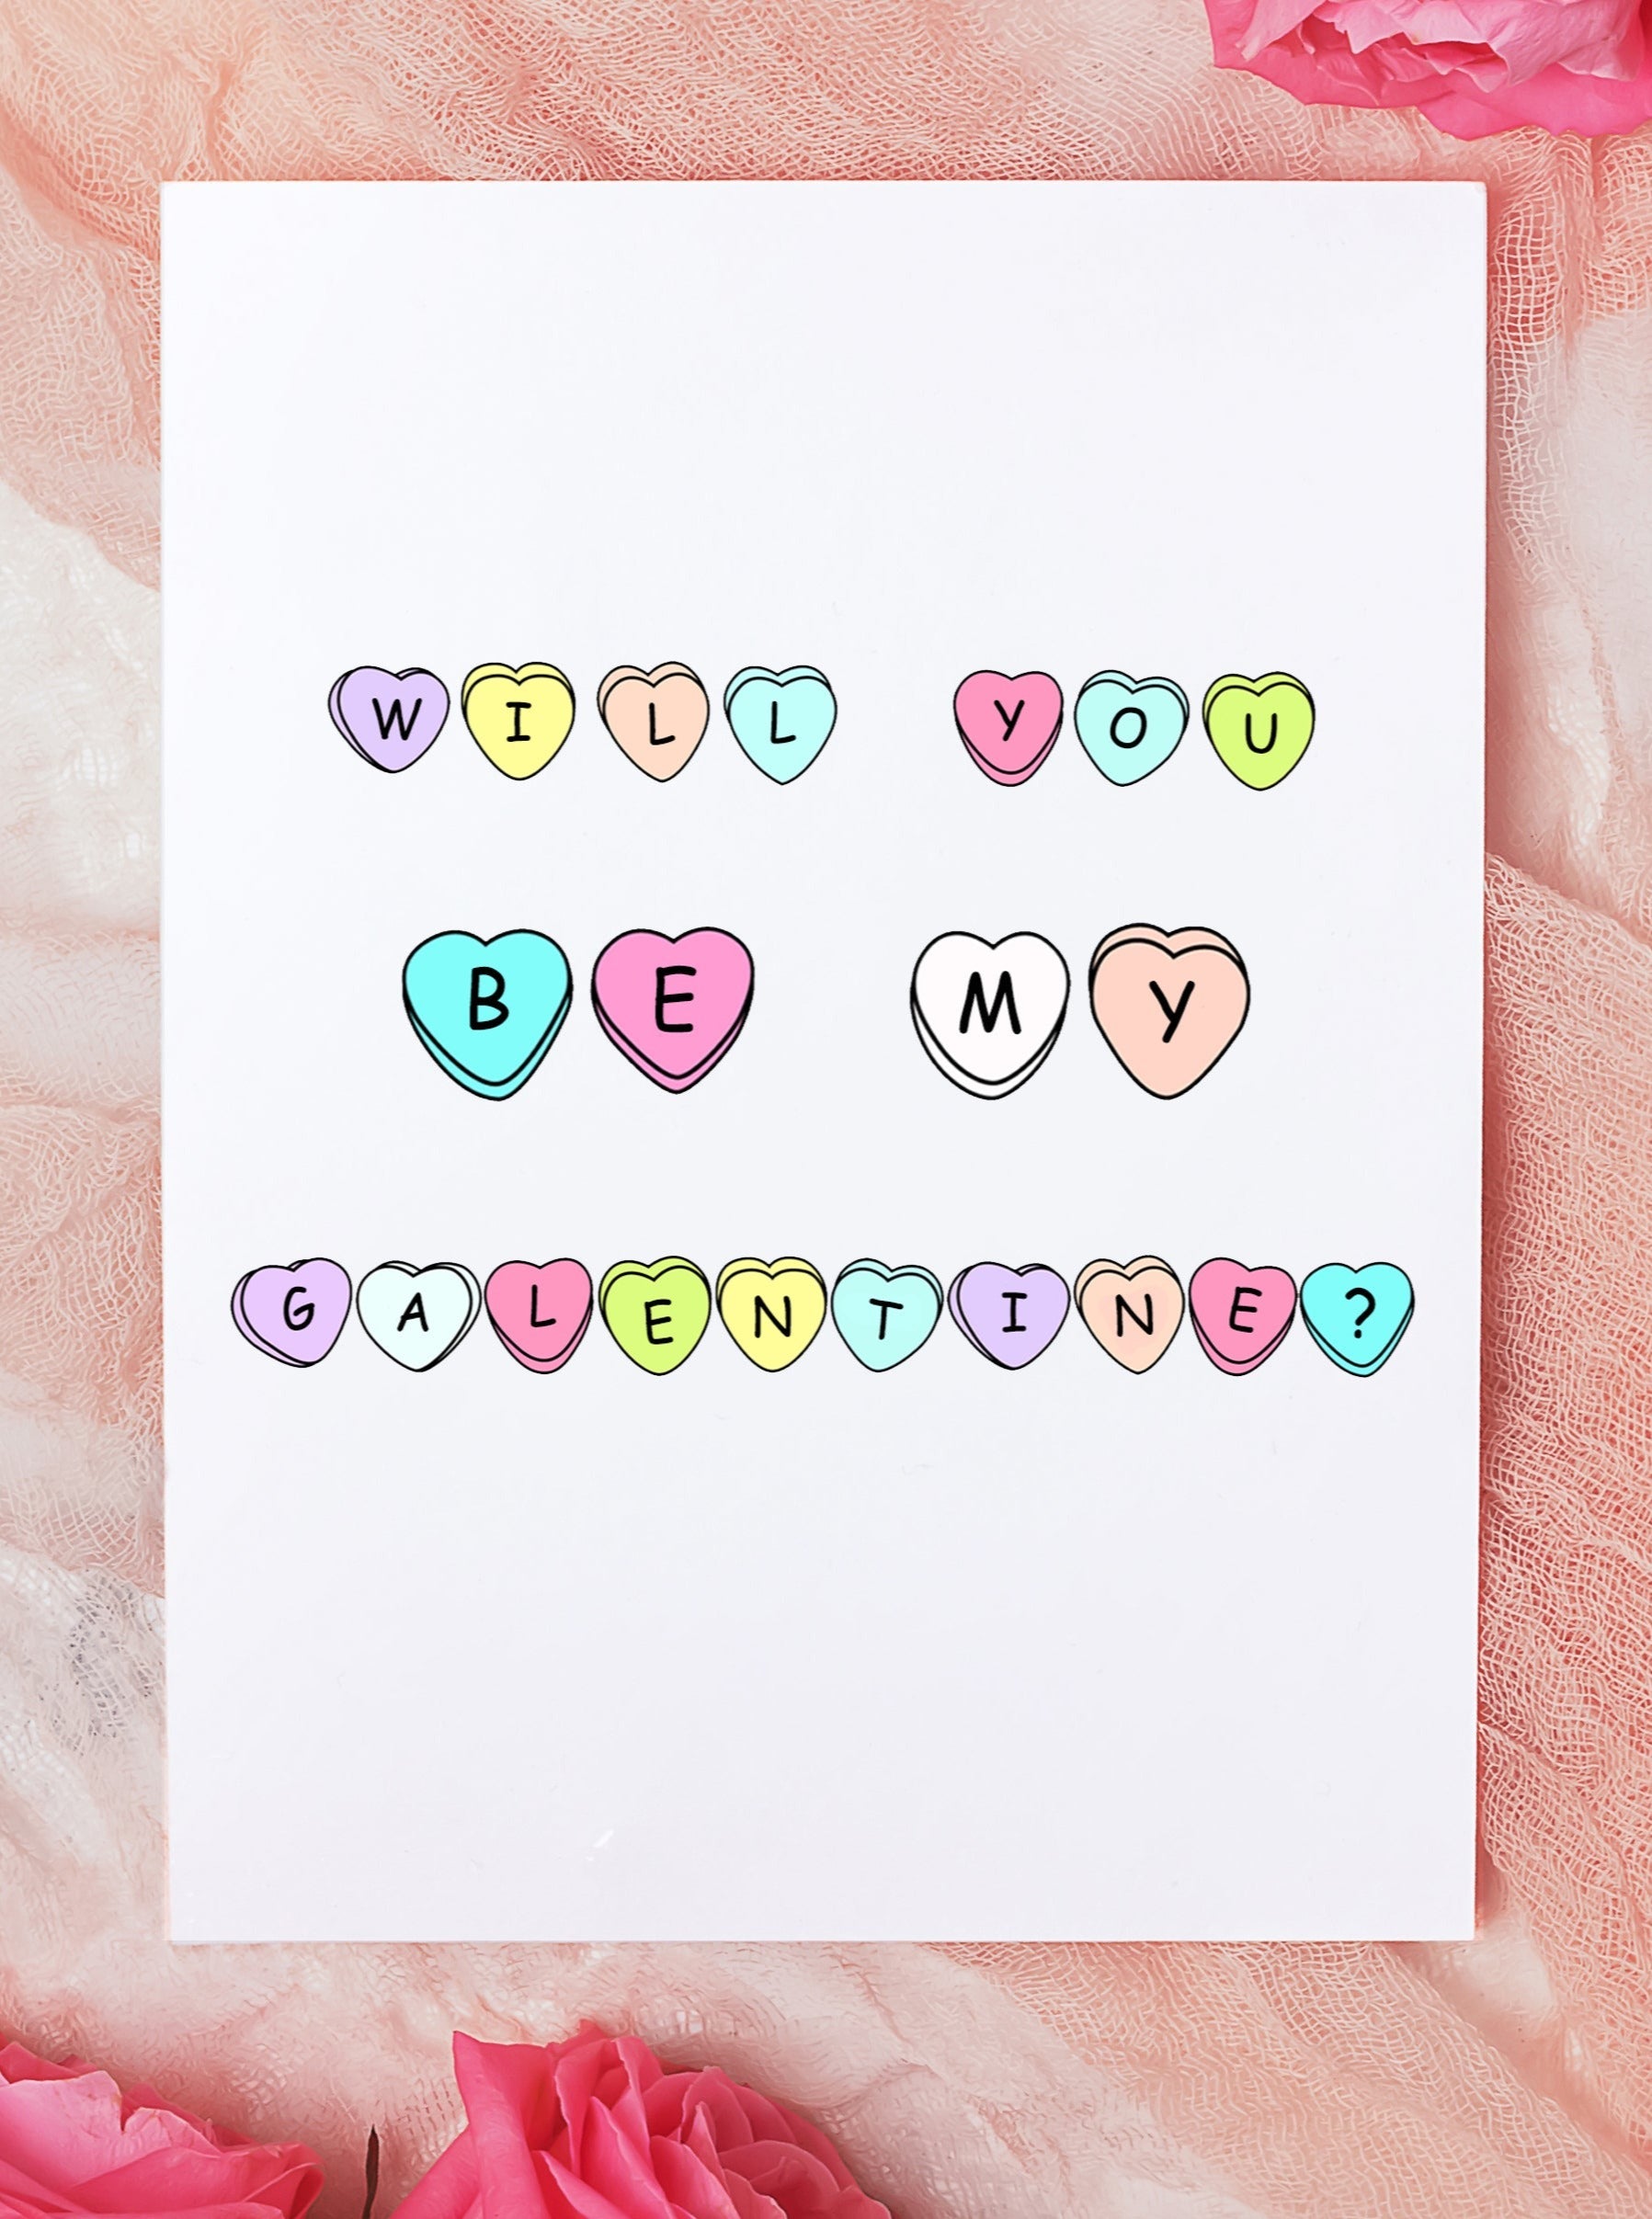 candy cards for friends